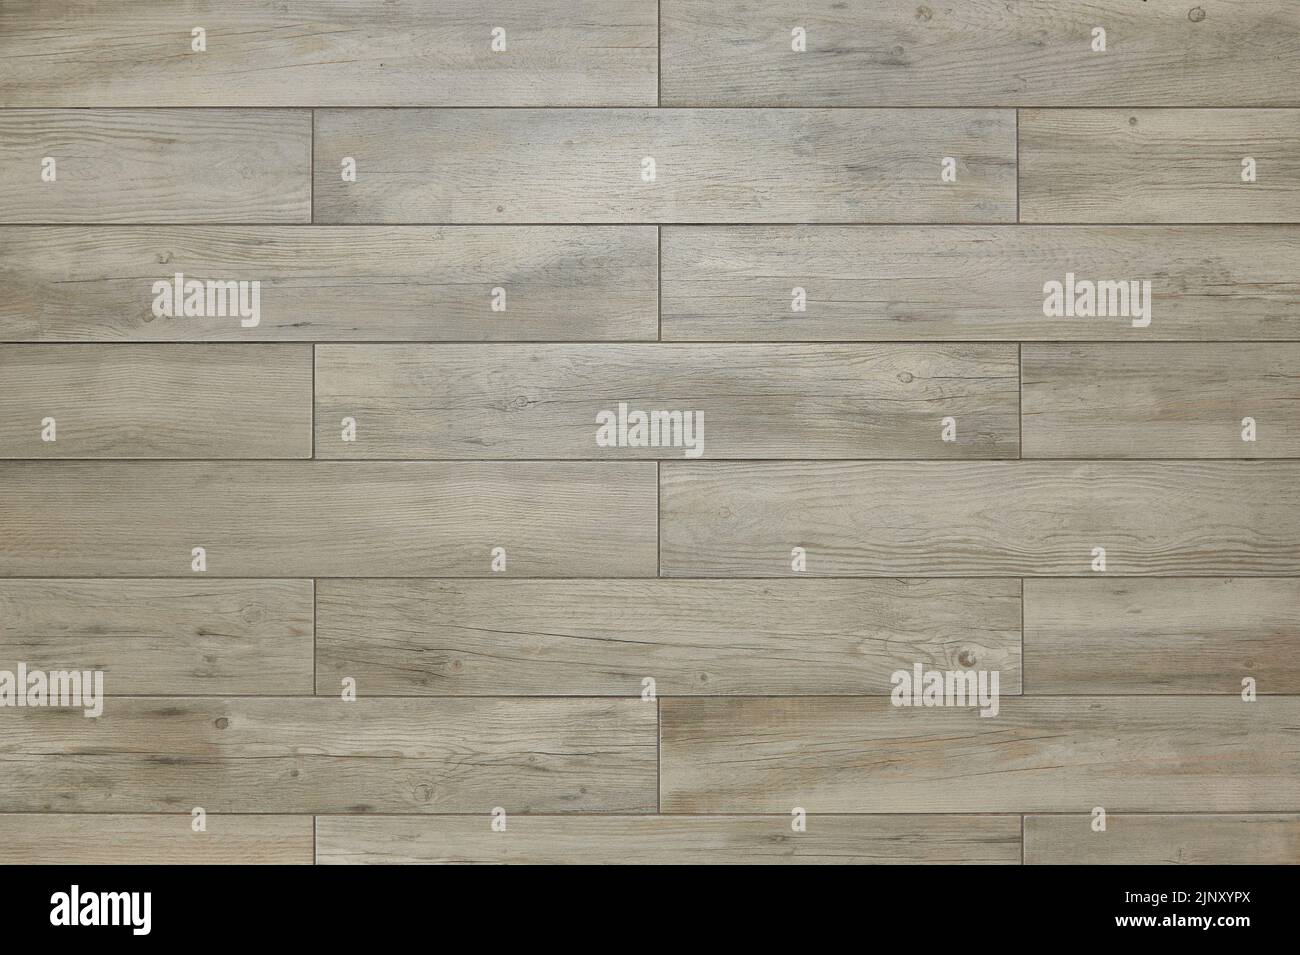 Ceramic tiled floor of wood style. Tiled flooring with wood texture Stock Photo